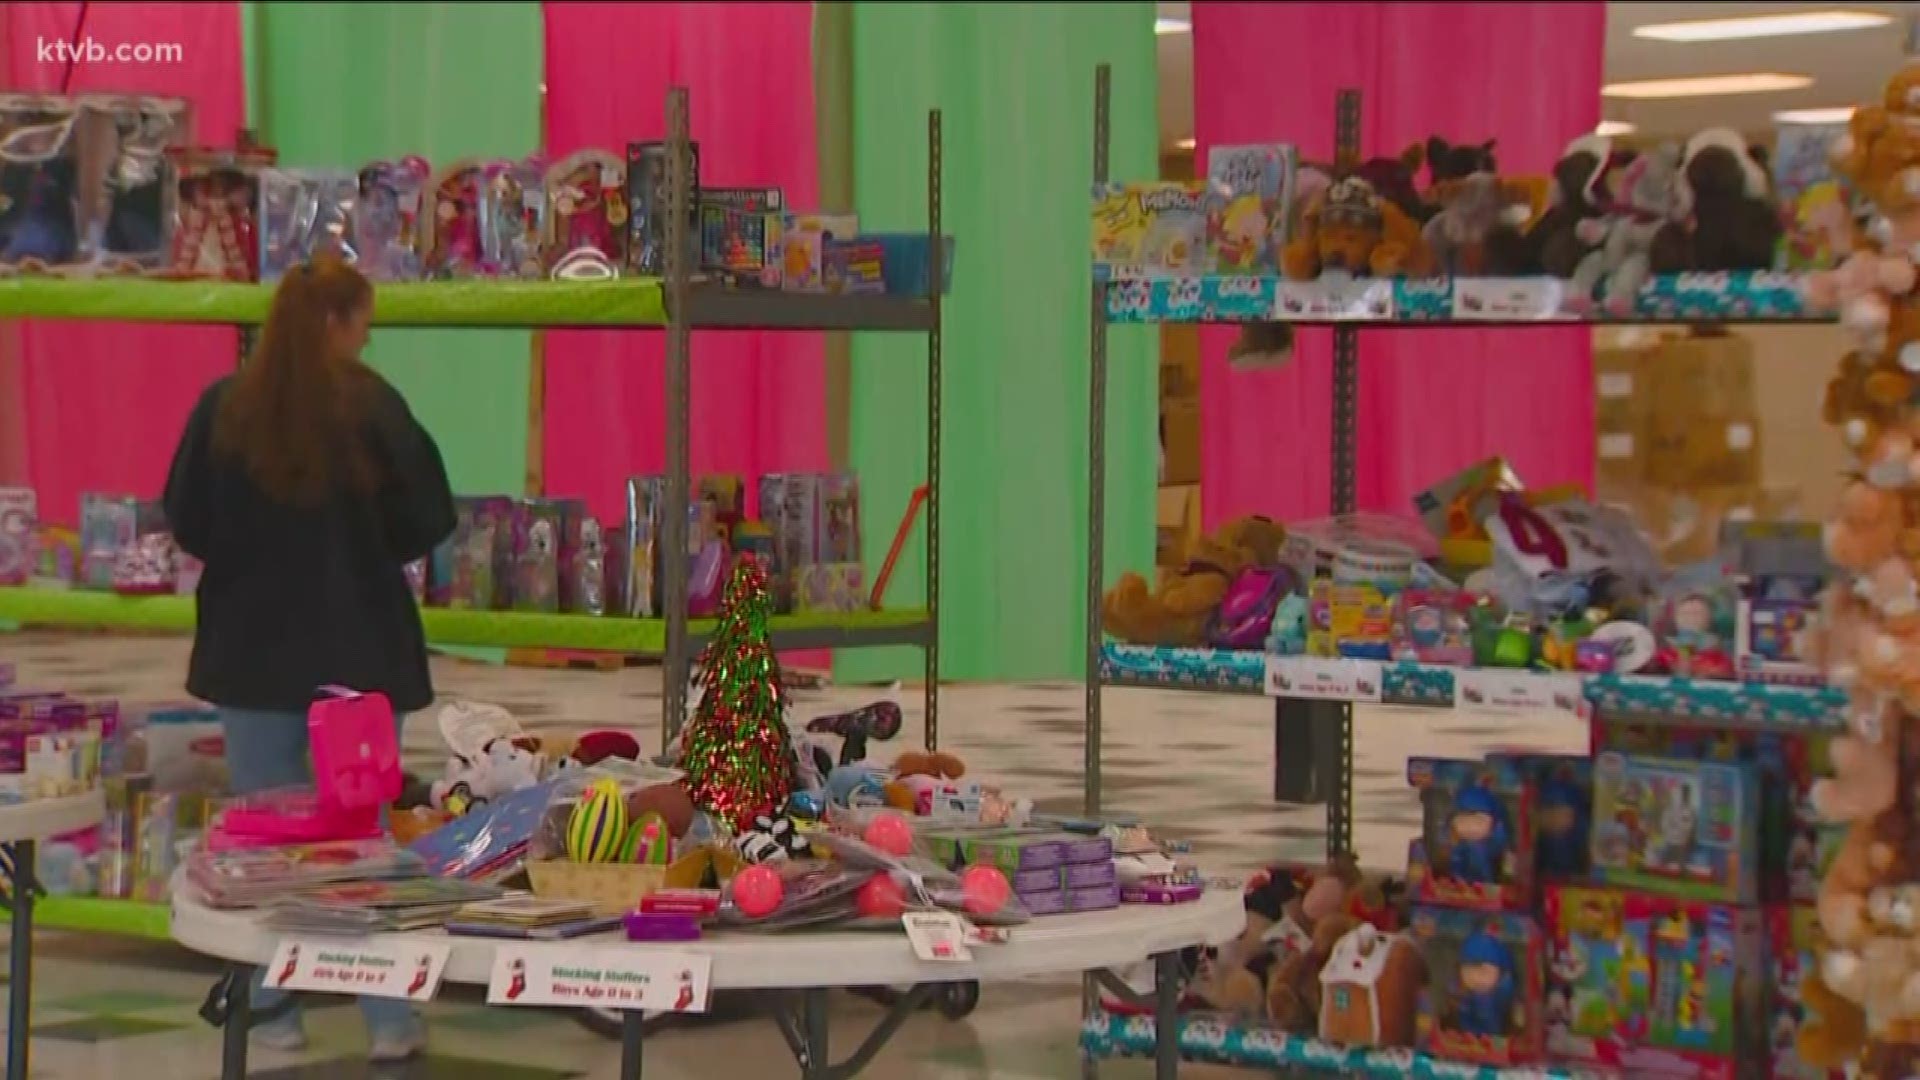 The St. Vincent de Paul toy store is open and ready to help families in need.